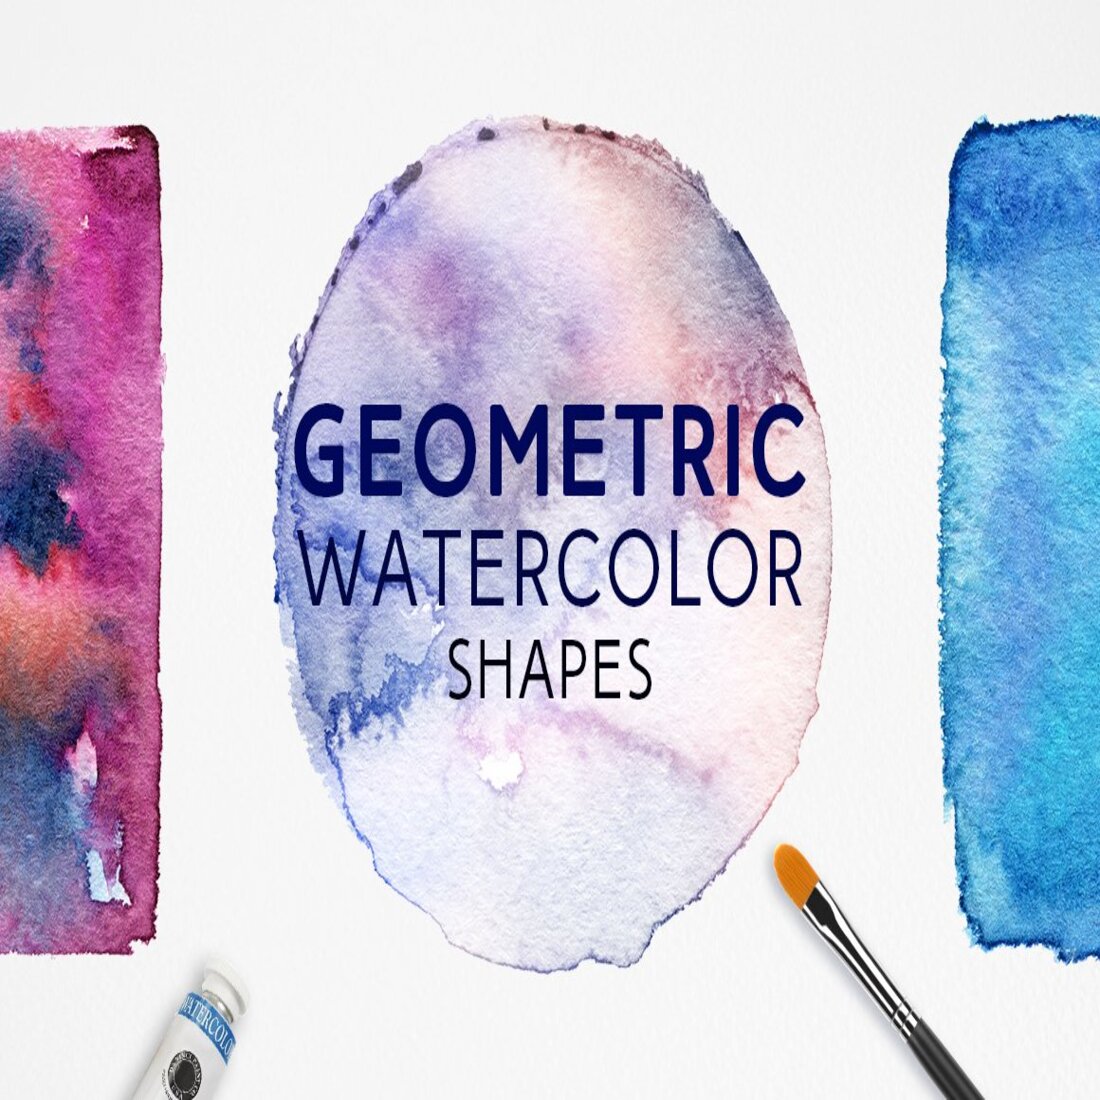 Geometric Watercolor Shapes cover.